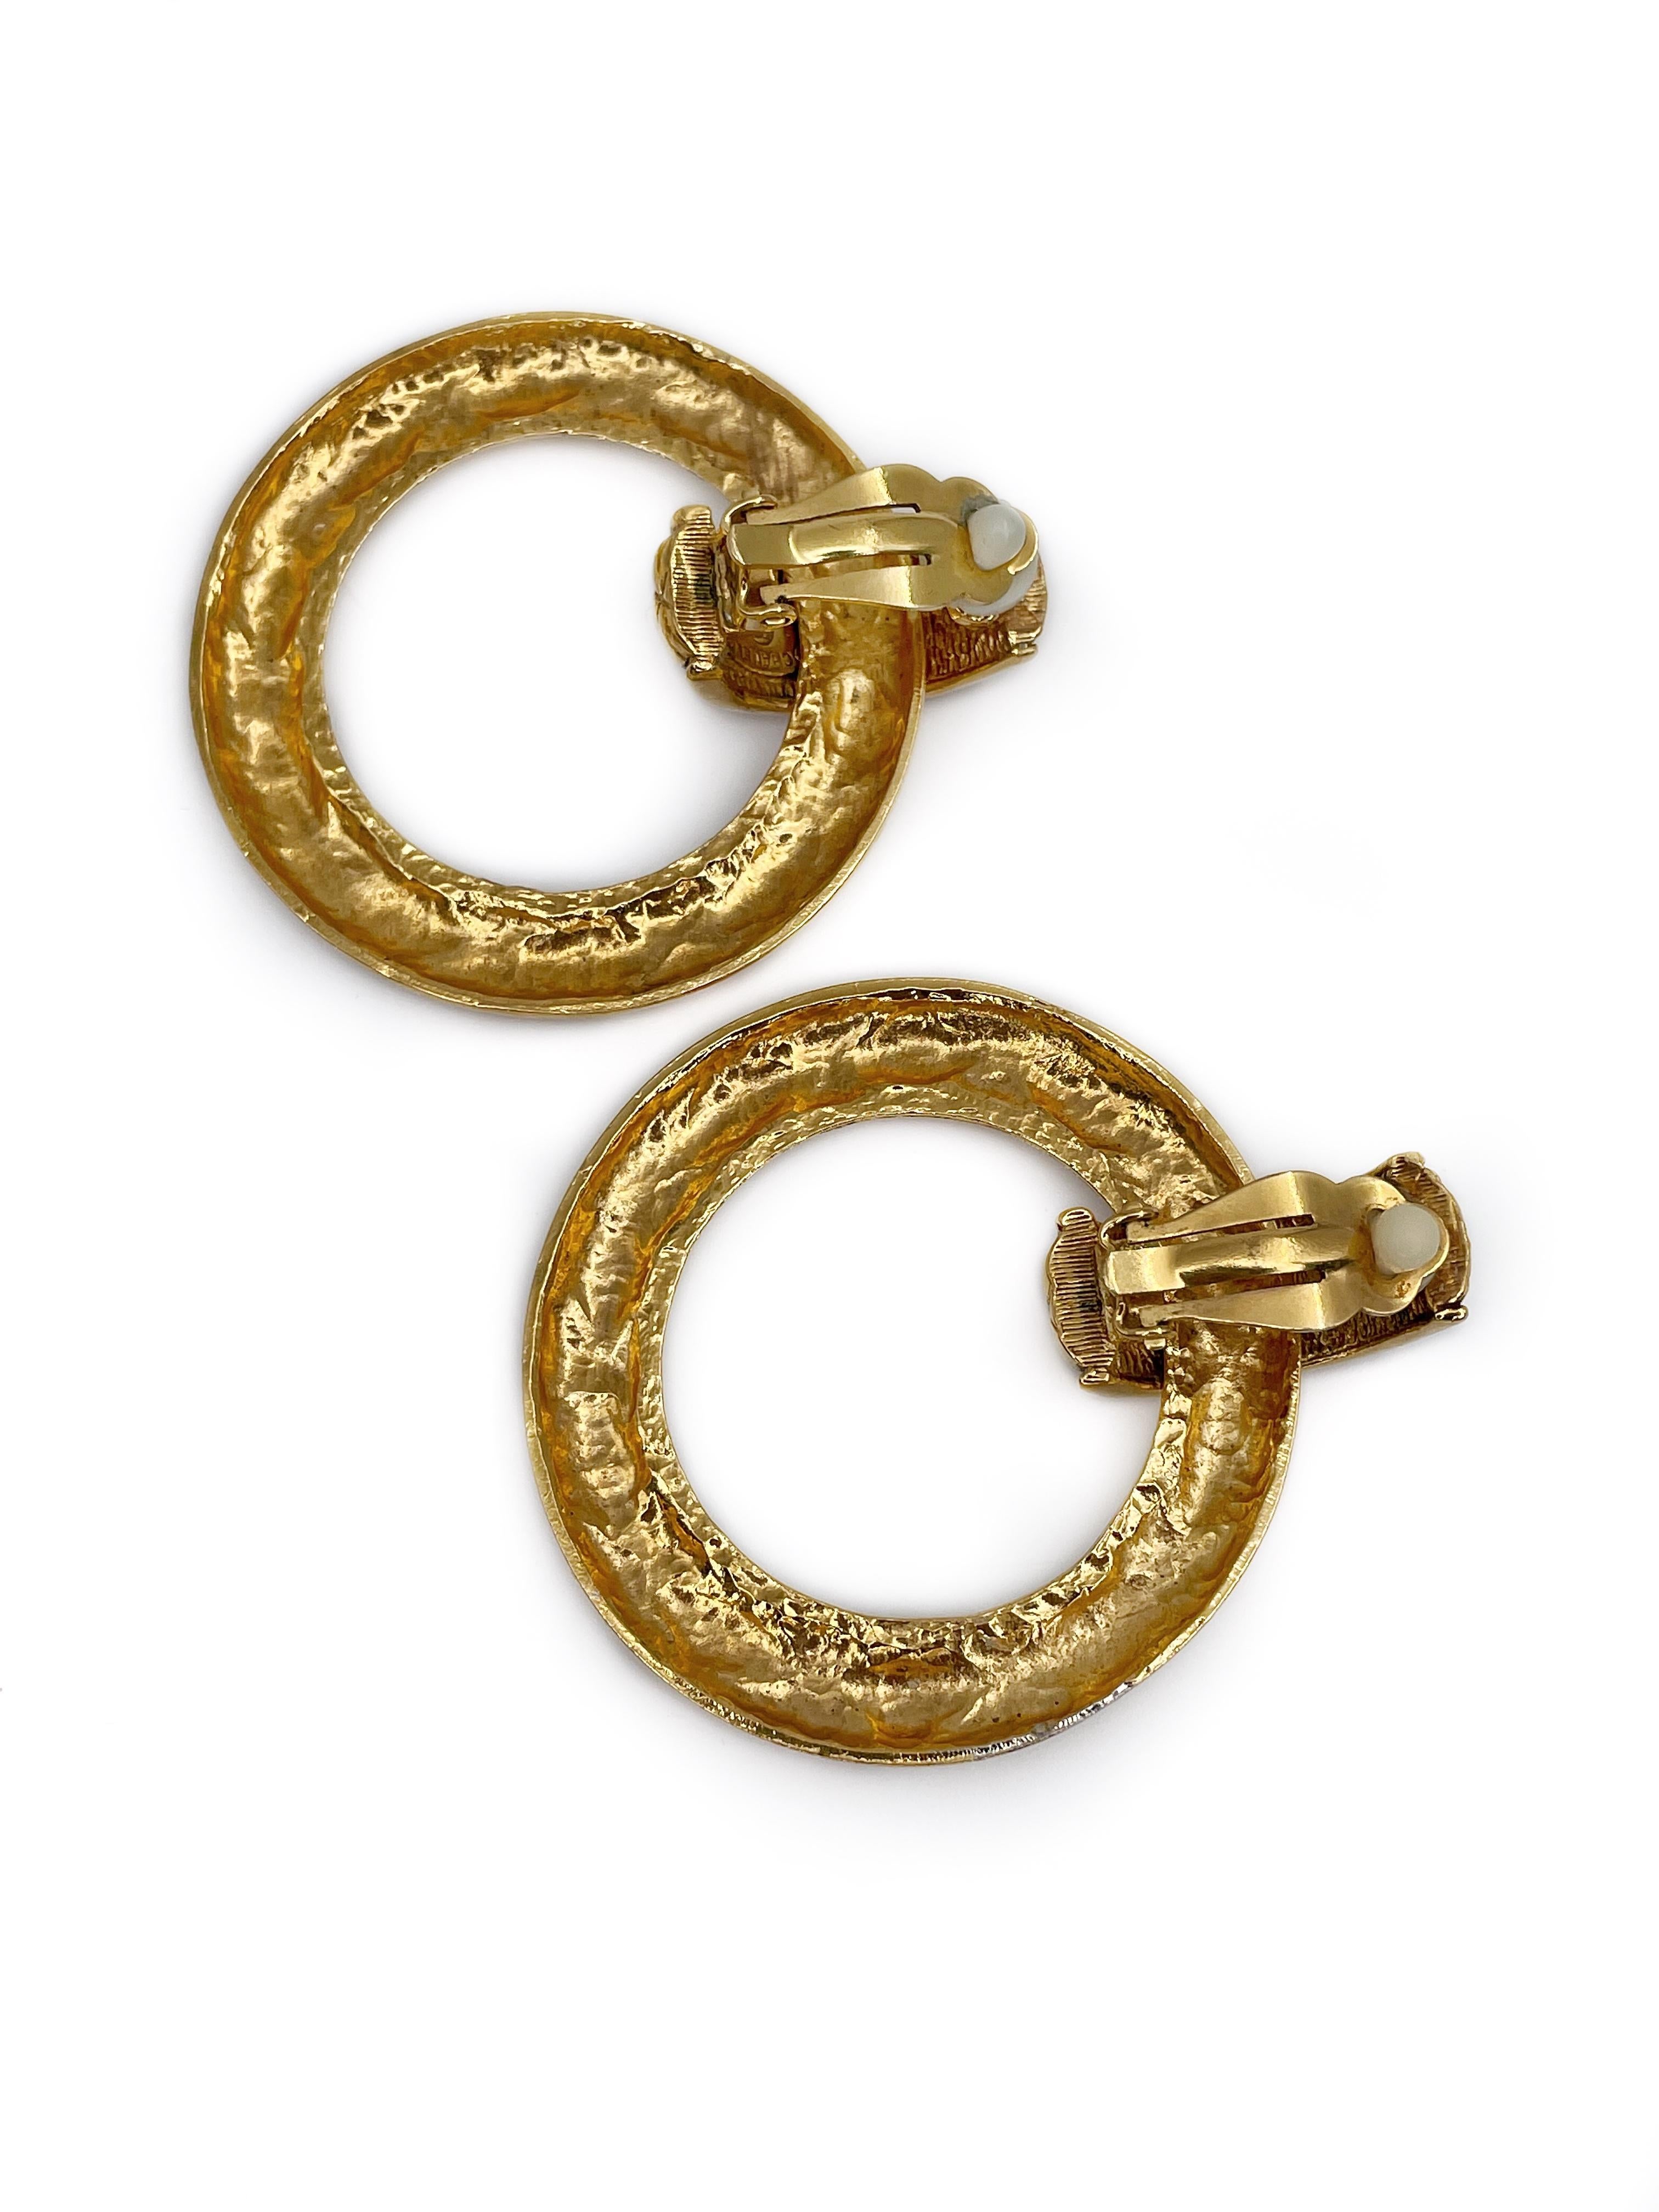 This is a gorgeous pair of gold tone quilted large hoop clip on earrings designed by Chanel in 1990’s. The piece is gold plated and etched with classic Chanel quilted pattern. These earrings can be worn in different ways by removing the hoops.